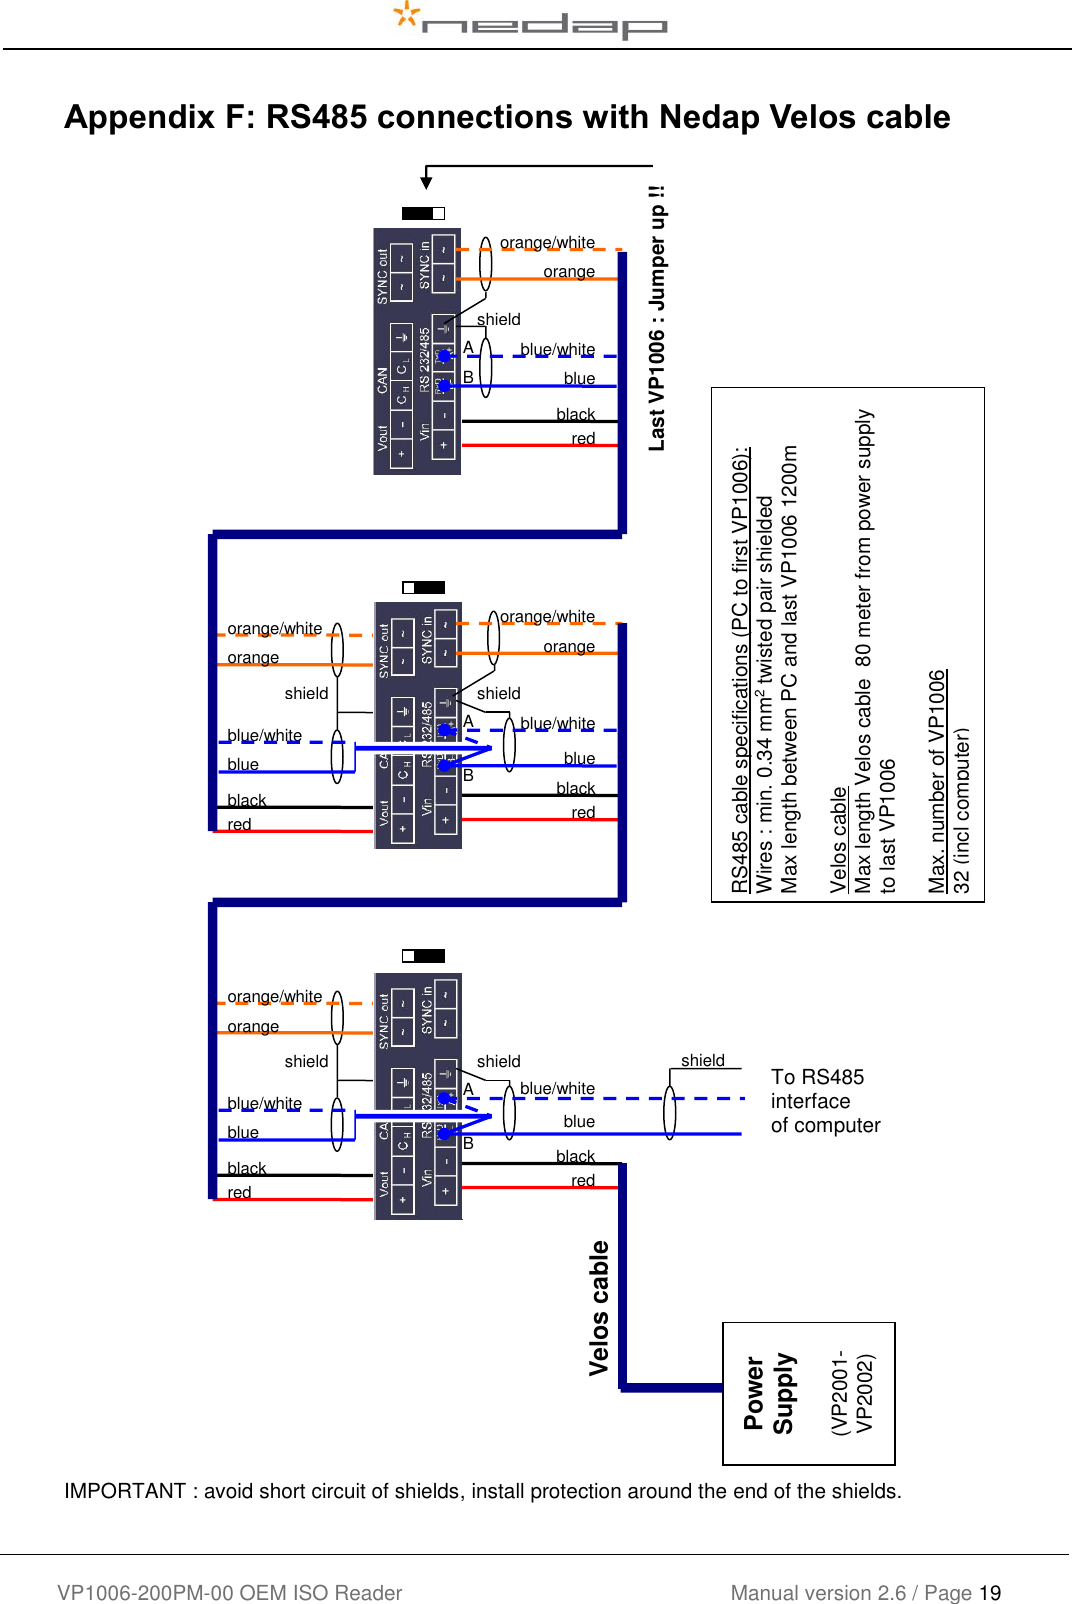    VP1006-200PM-00 OEM ISO Reader Manual version 2.6 / Page 19   Appendix F: RS485 connections with Nedap Velos cable   IMPORTANT : avoid short circuit of shields, install protection around the end of the shields.     red black orange orange/white red black orange orange/white blue blue/white shield red black orange orange/white red black blue blue/white shield red black orange orange/white blue blue/white shield B A To RS485  interface of computer blue blue/white shield B A shield blue blue/white shield B A RS485 cable specifications (PC to first VP1006): Wires : min. 0.34 mm2 twisted pair shielded Max length between PC and last VP1006 1200m  Velos cable Max length Velos cable  80 meter from power supply to last VP1006  Max. number of VP1006 32 (incl computer)  Velos cable Last VP1006 : Jumper up !! Power Supply  (VP2001- VP2002) 